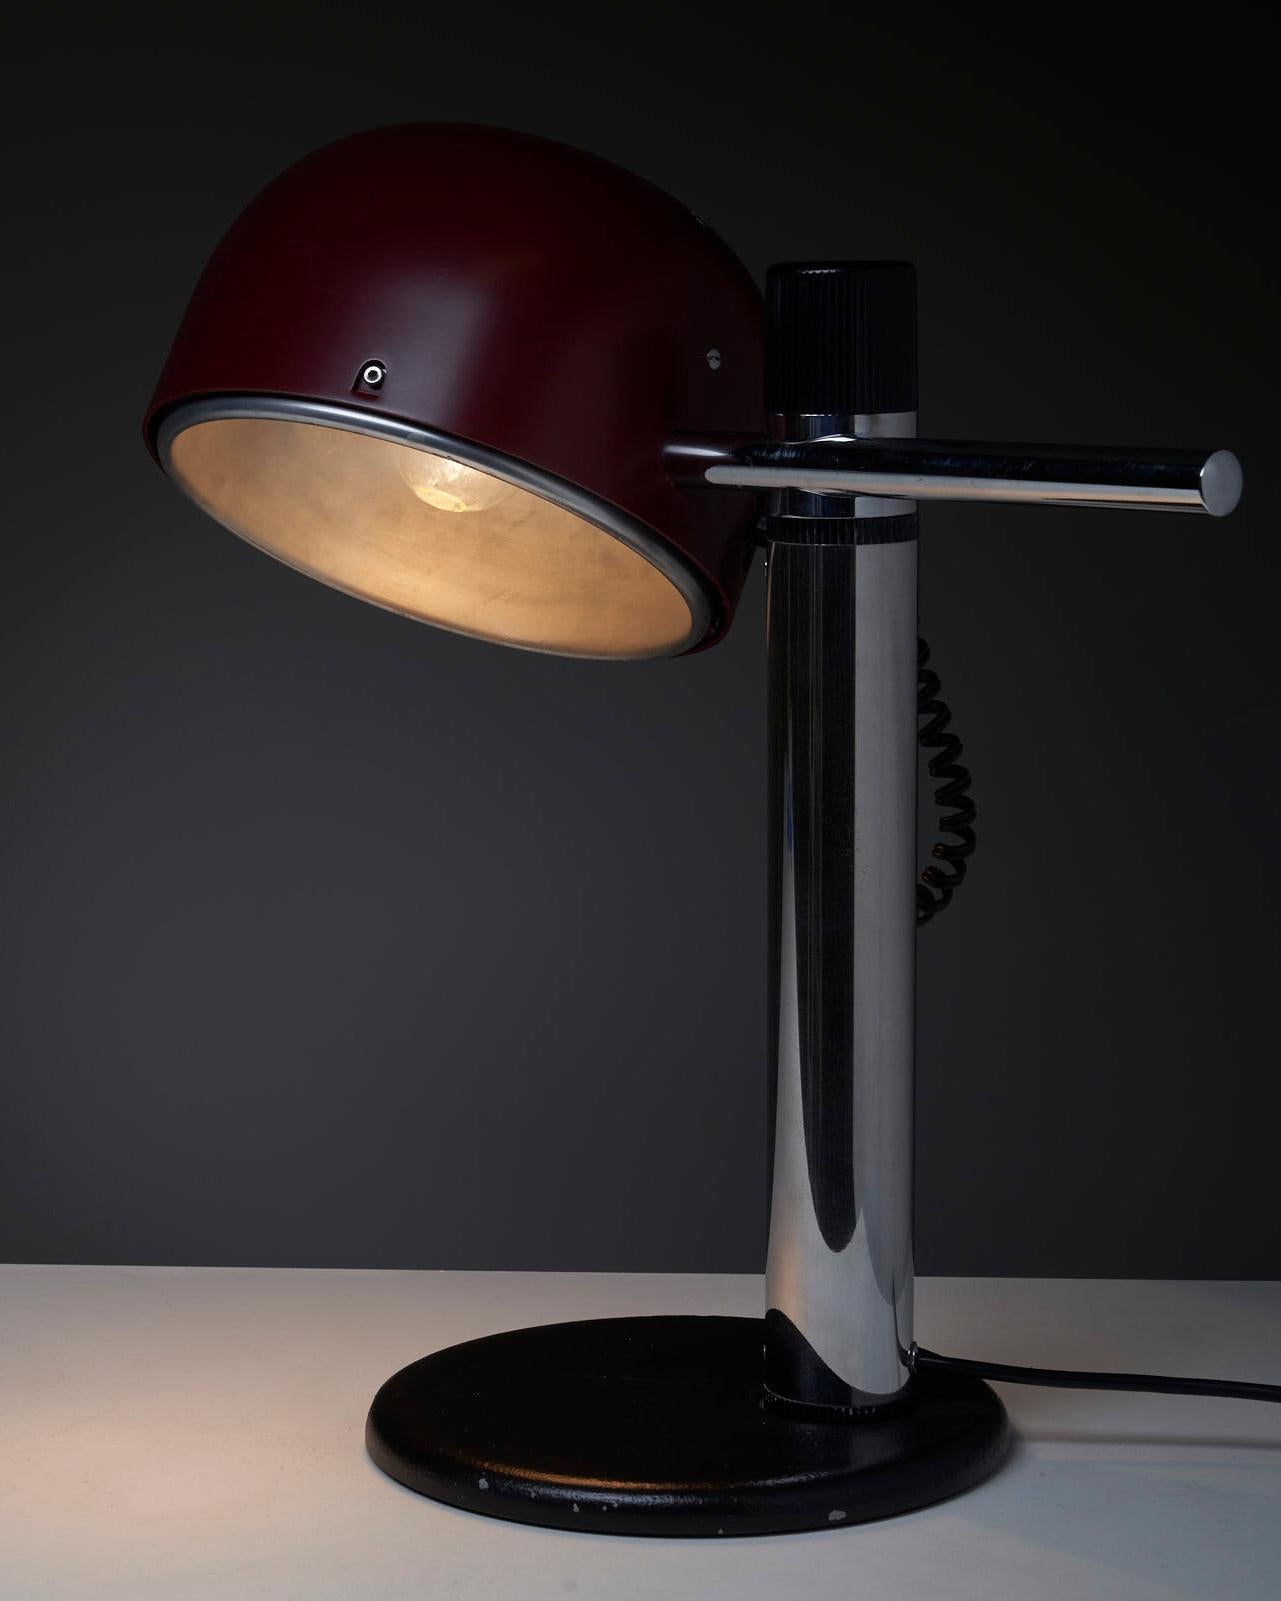 The moveable shade along the lamp holder adds flexibility and versatility to the lamp's positioning, and the reflective inner shade can help to create a focused and directed beam of light. The dark bordeaux color adds a touch of elegance and